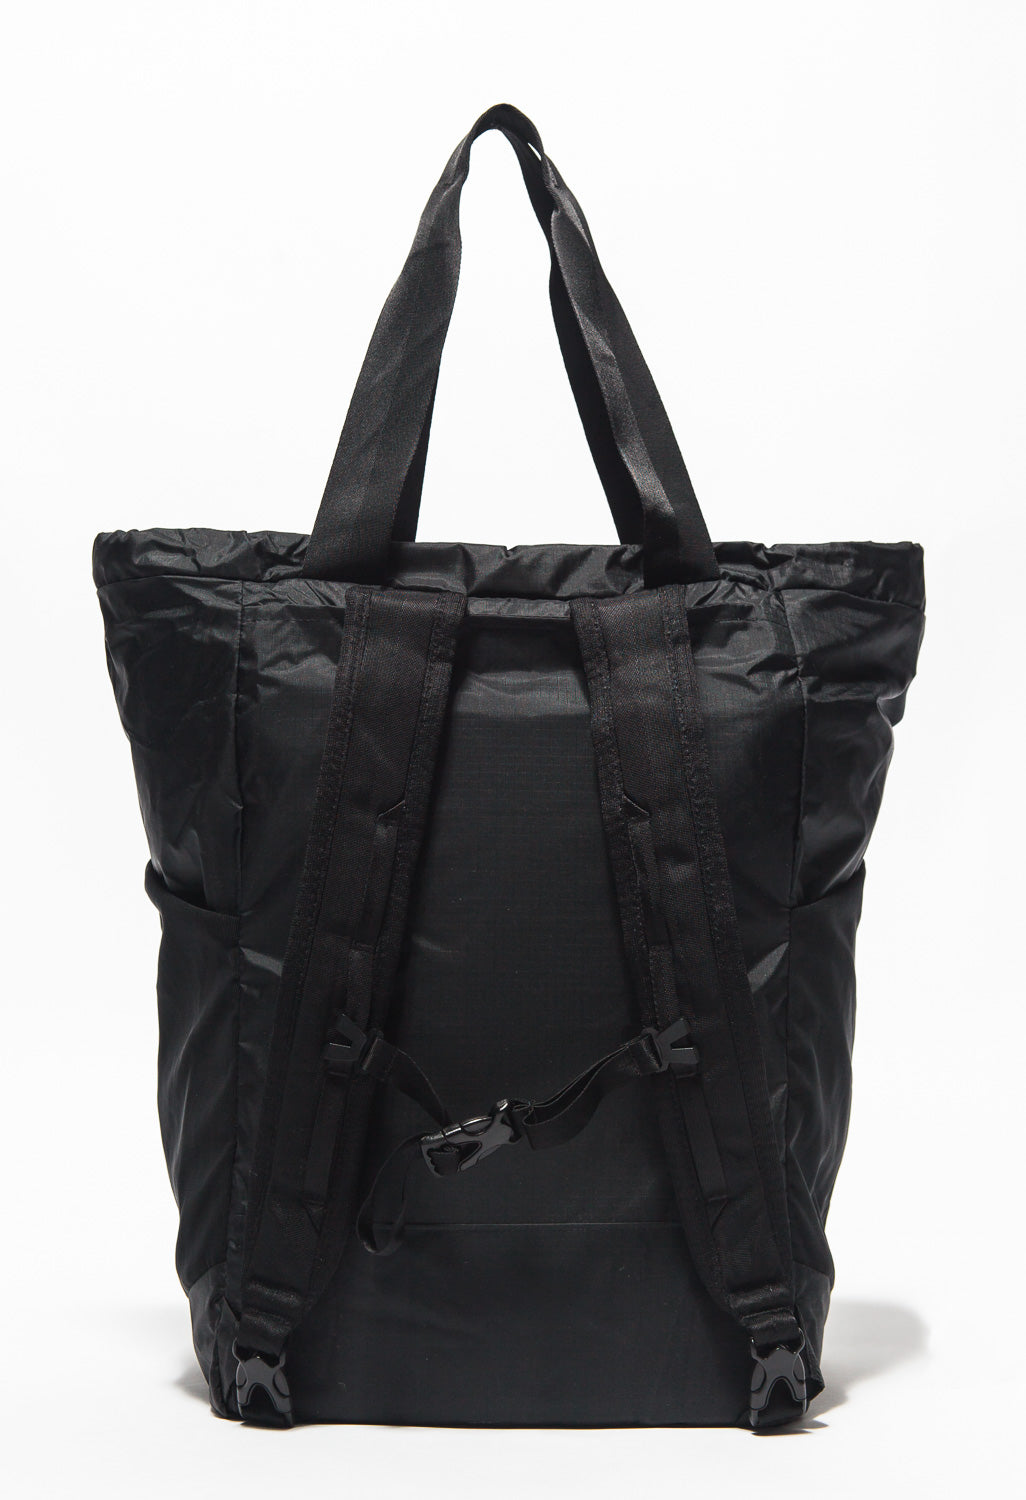 Patagonia Ultralight Black Hole Tote Pack – Outsiders Store UK